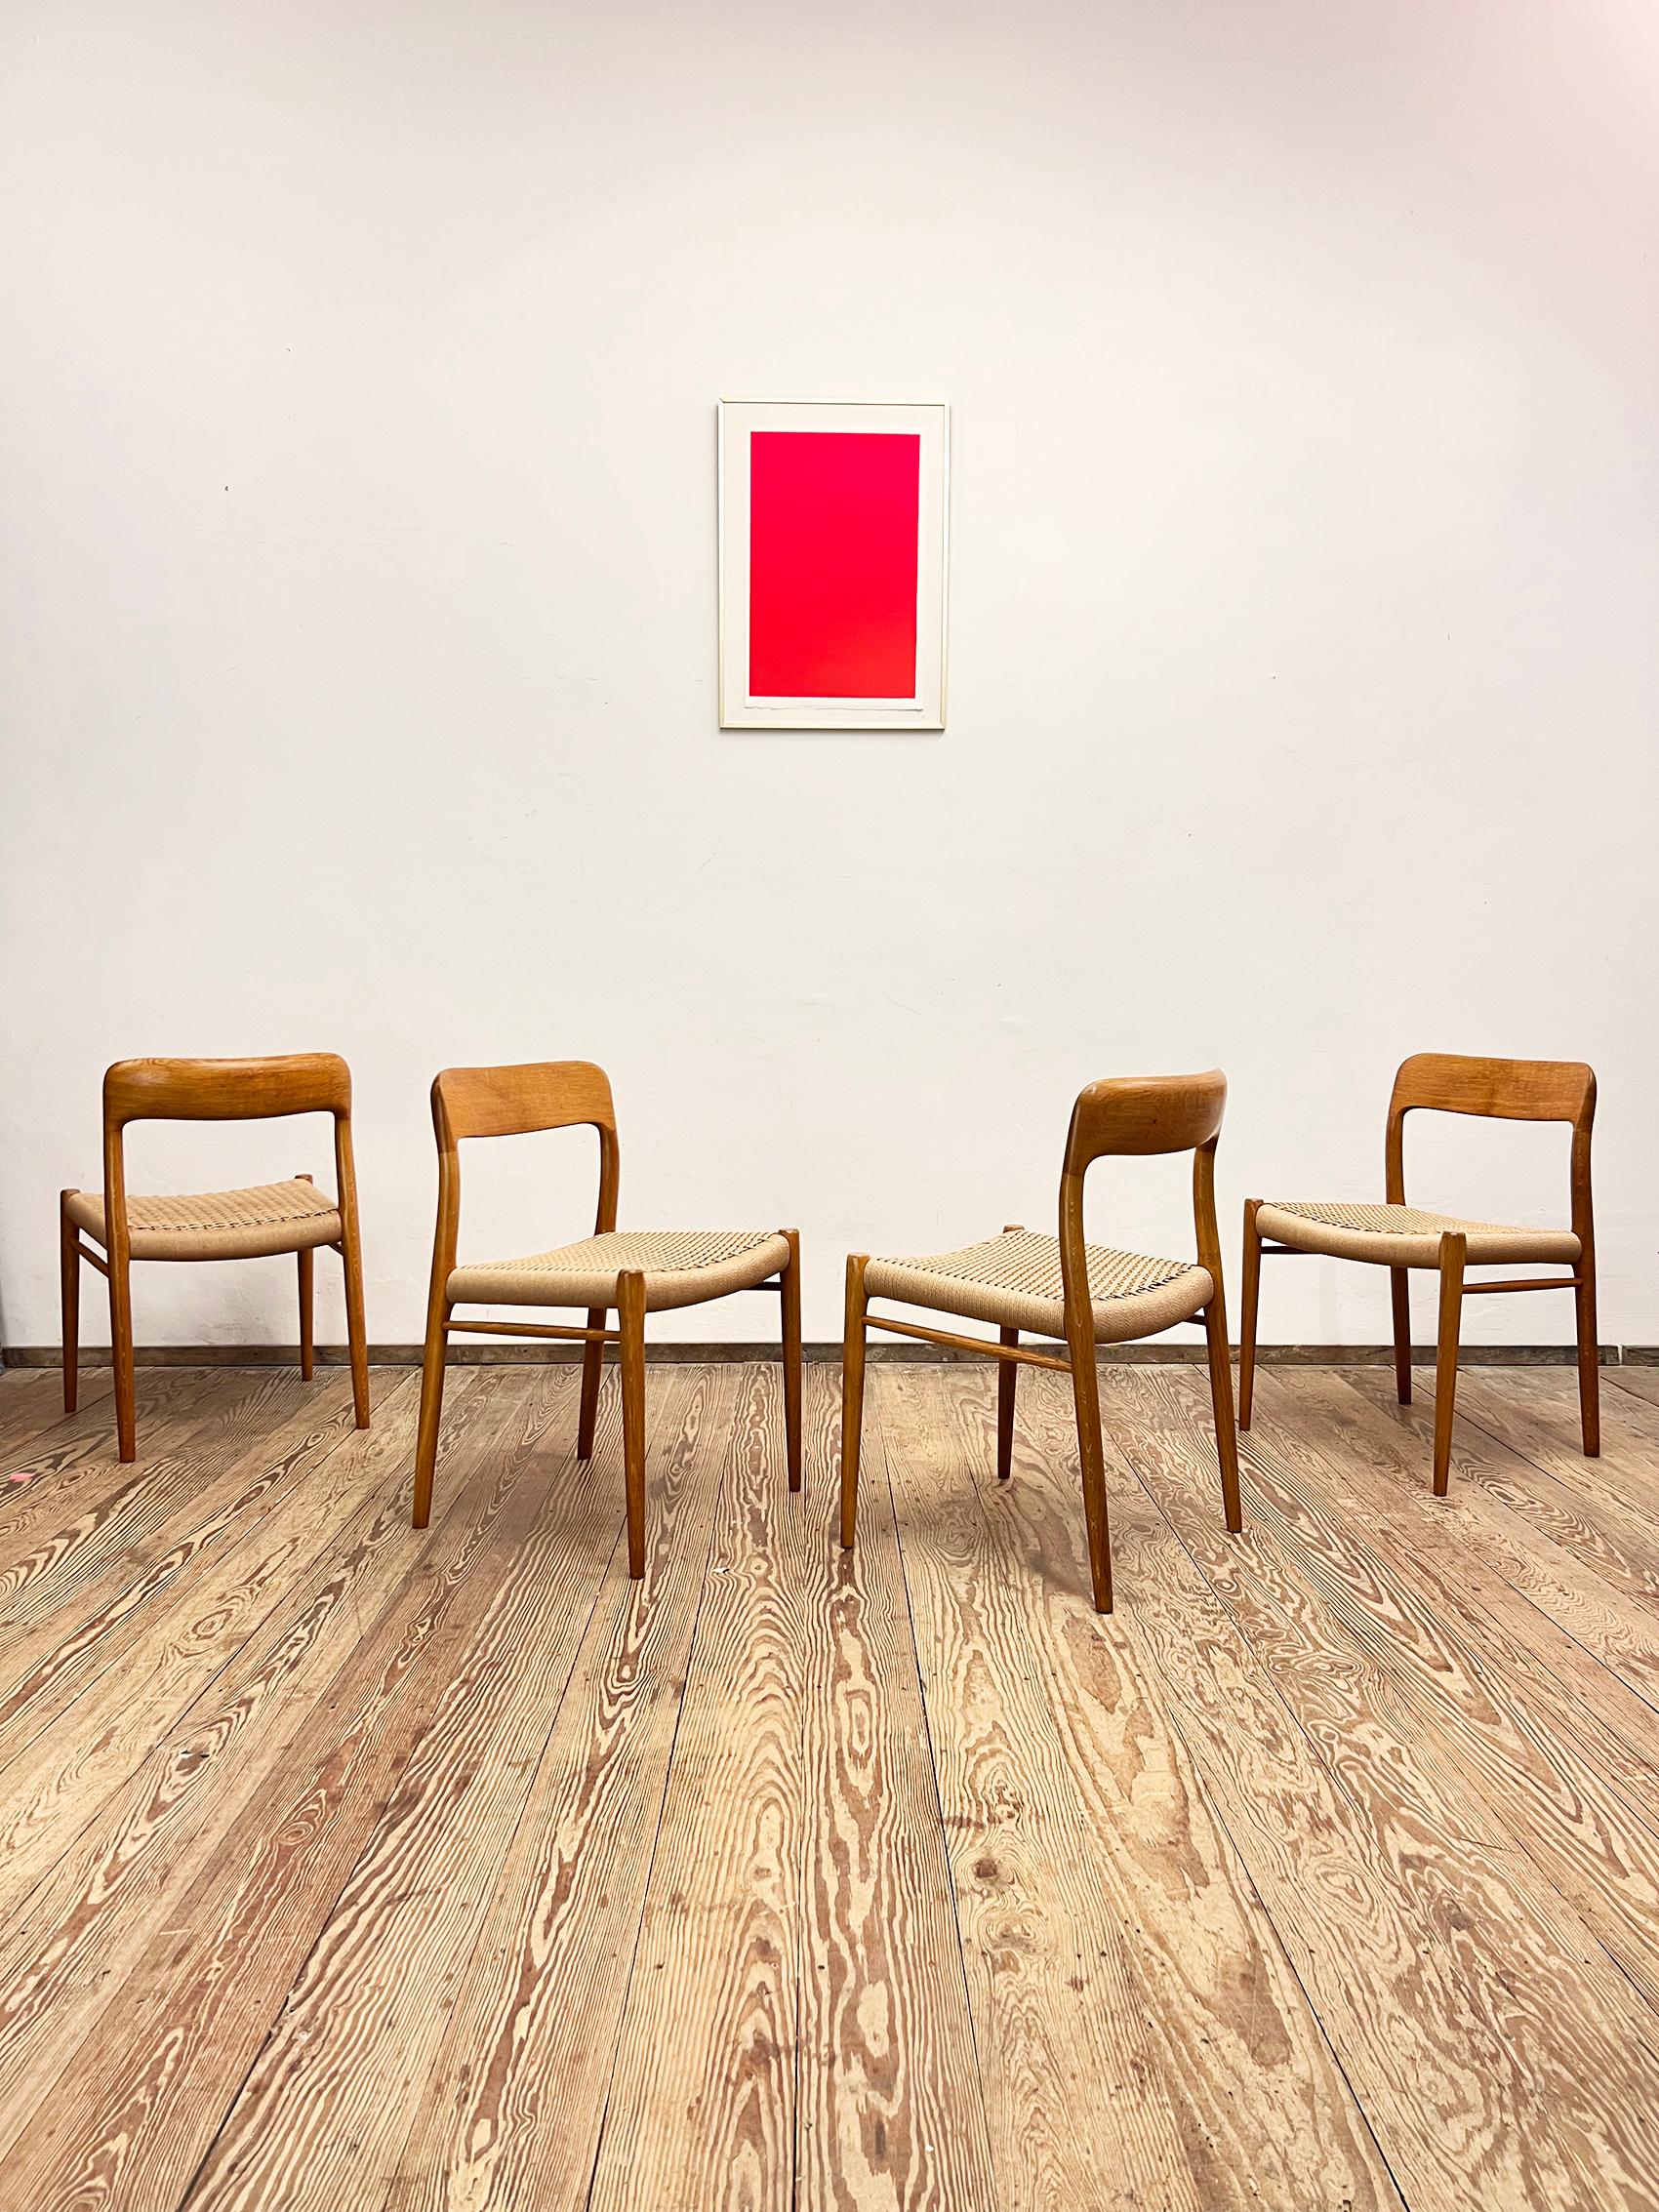 Dimensions: 50x47x75x44cm (Width x Depth x Height x Seat Height)

Danish Design by Niels O. Møller manufacured by J.L. Møllers in Denmark in the 1950s. The set features 4 oak wood chairs of Niels O. Møllers famous model 75, a Scandinavian design